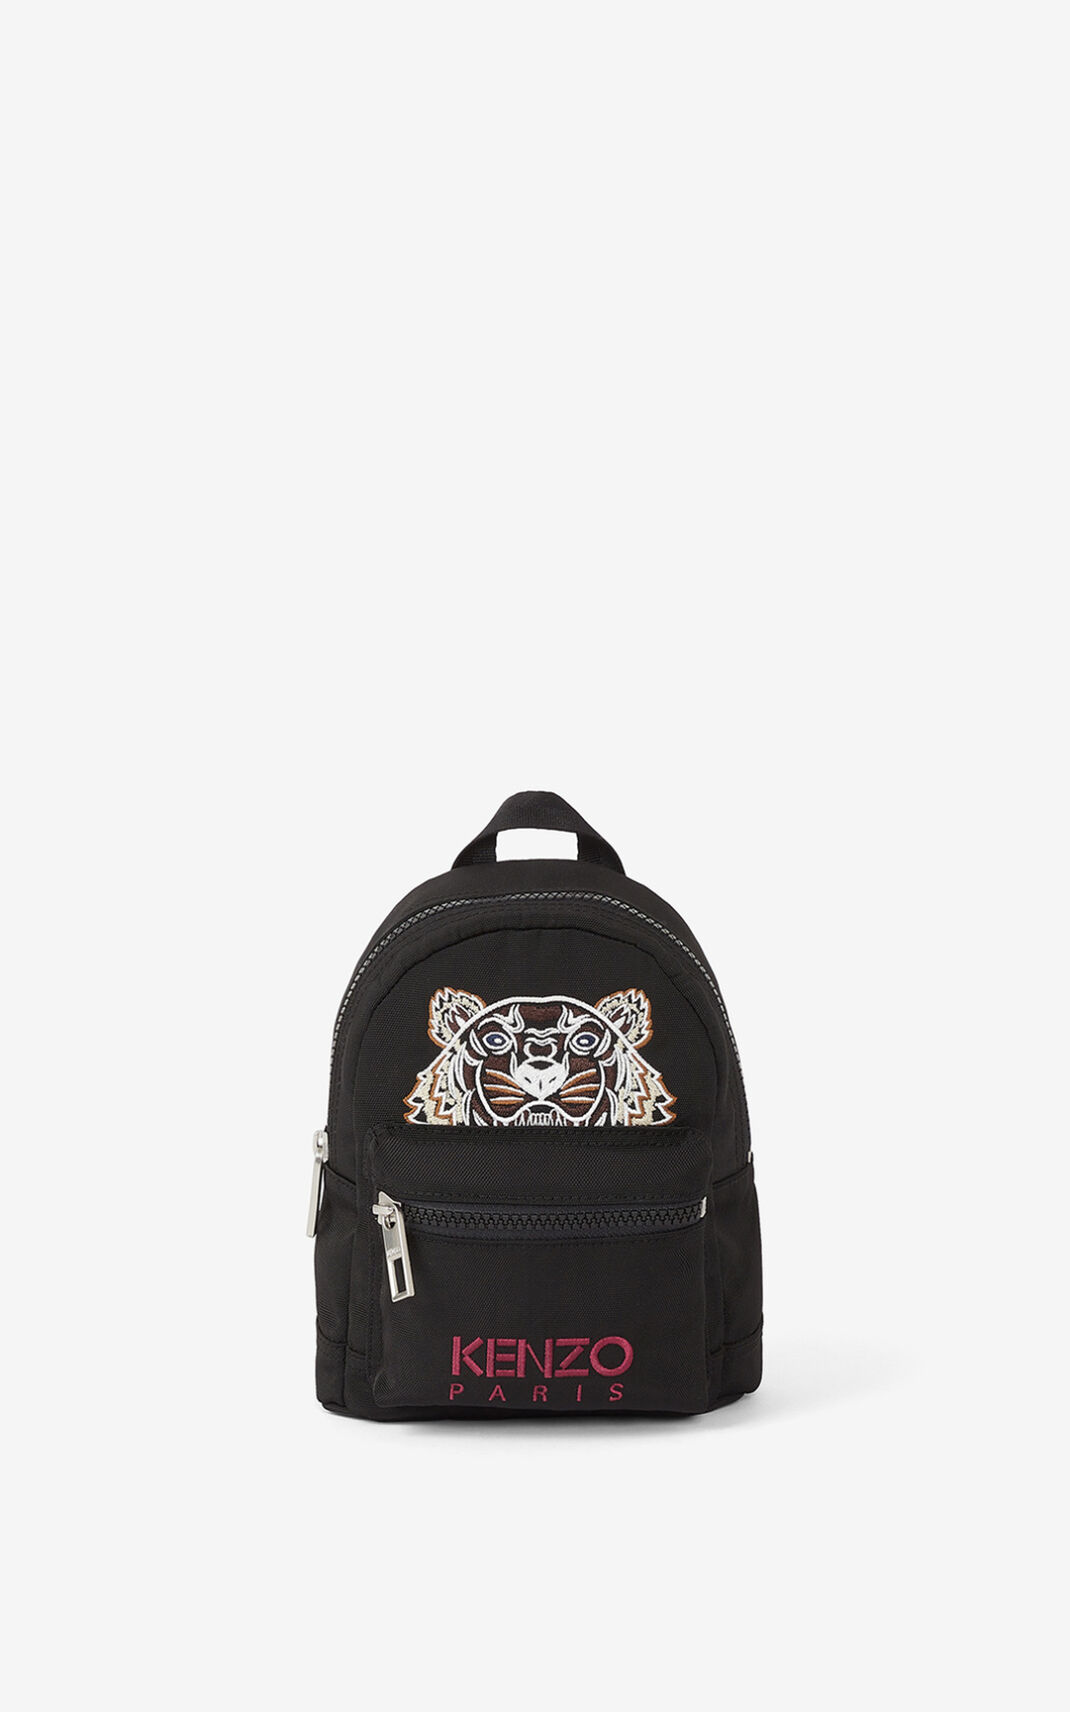 Kenzo Mini canvas Kampus Tiger Backpack Black For Womens 7069BKYGN